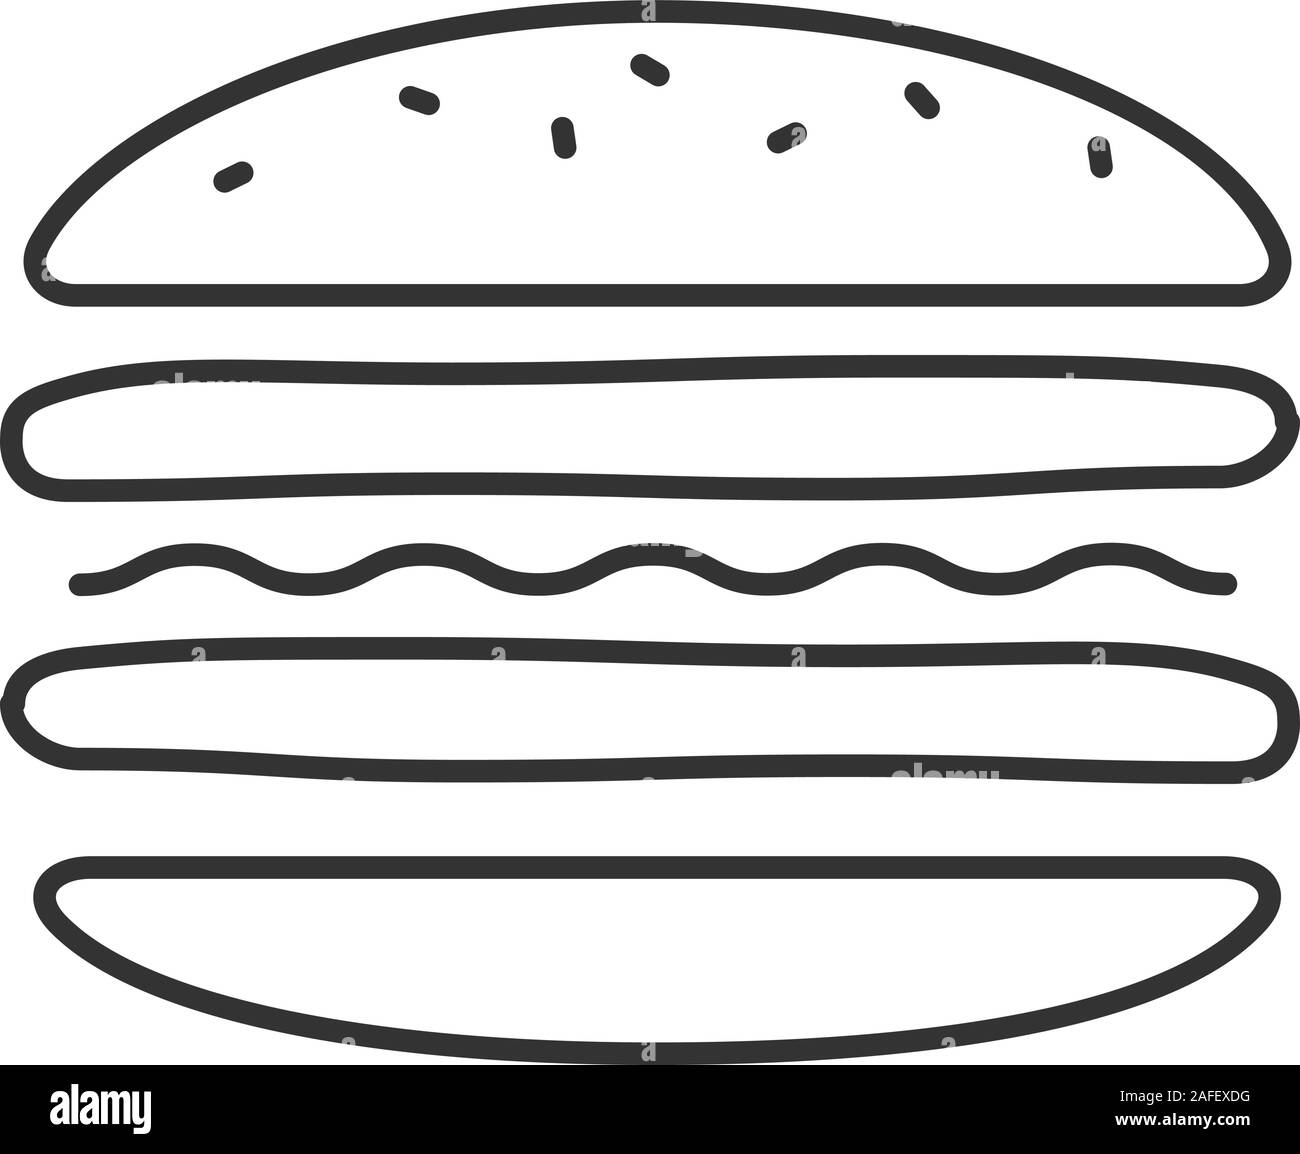 Burger cutaway linear icon. Sandwich. Thin line illustration. Hamburger assembly. Contour symbol. Vector isolated outline drawing Stock Vector